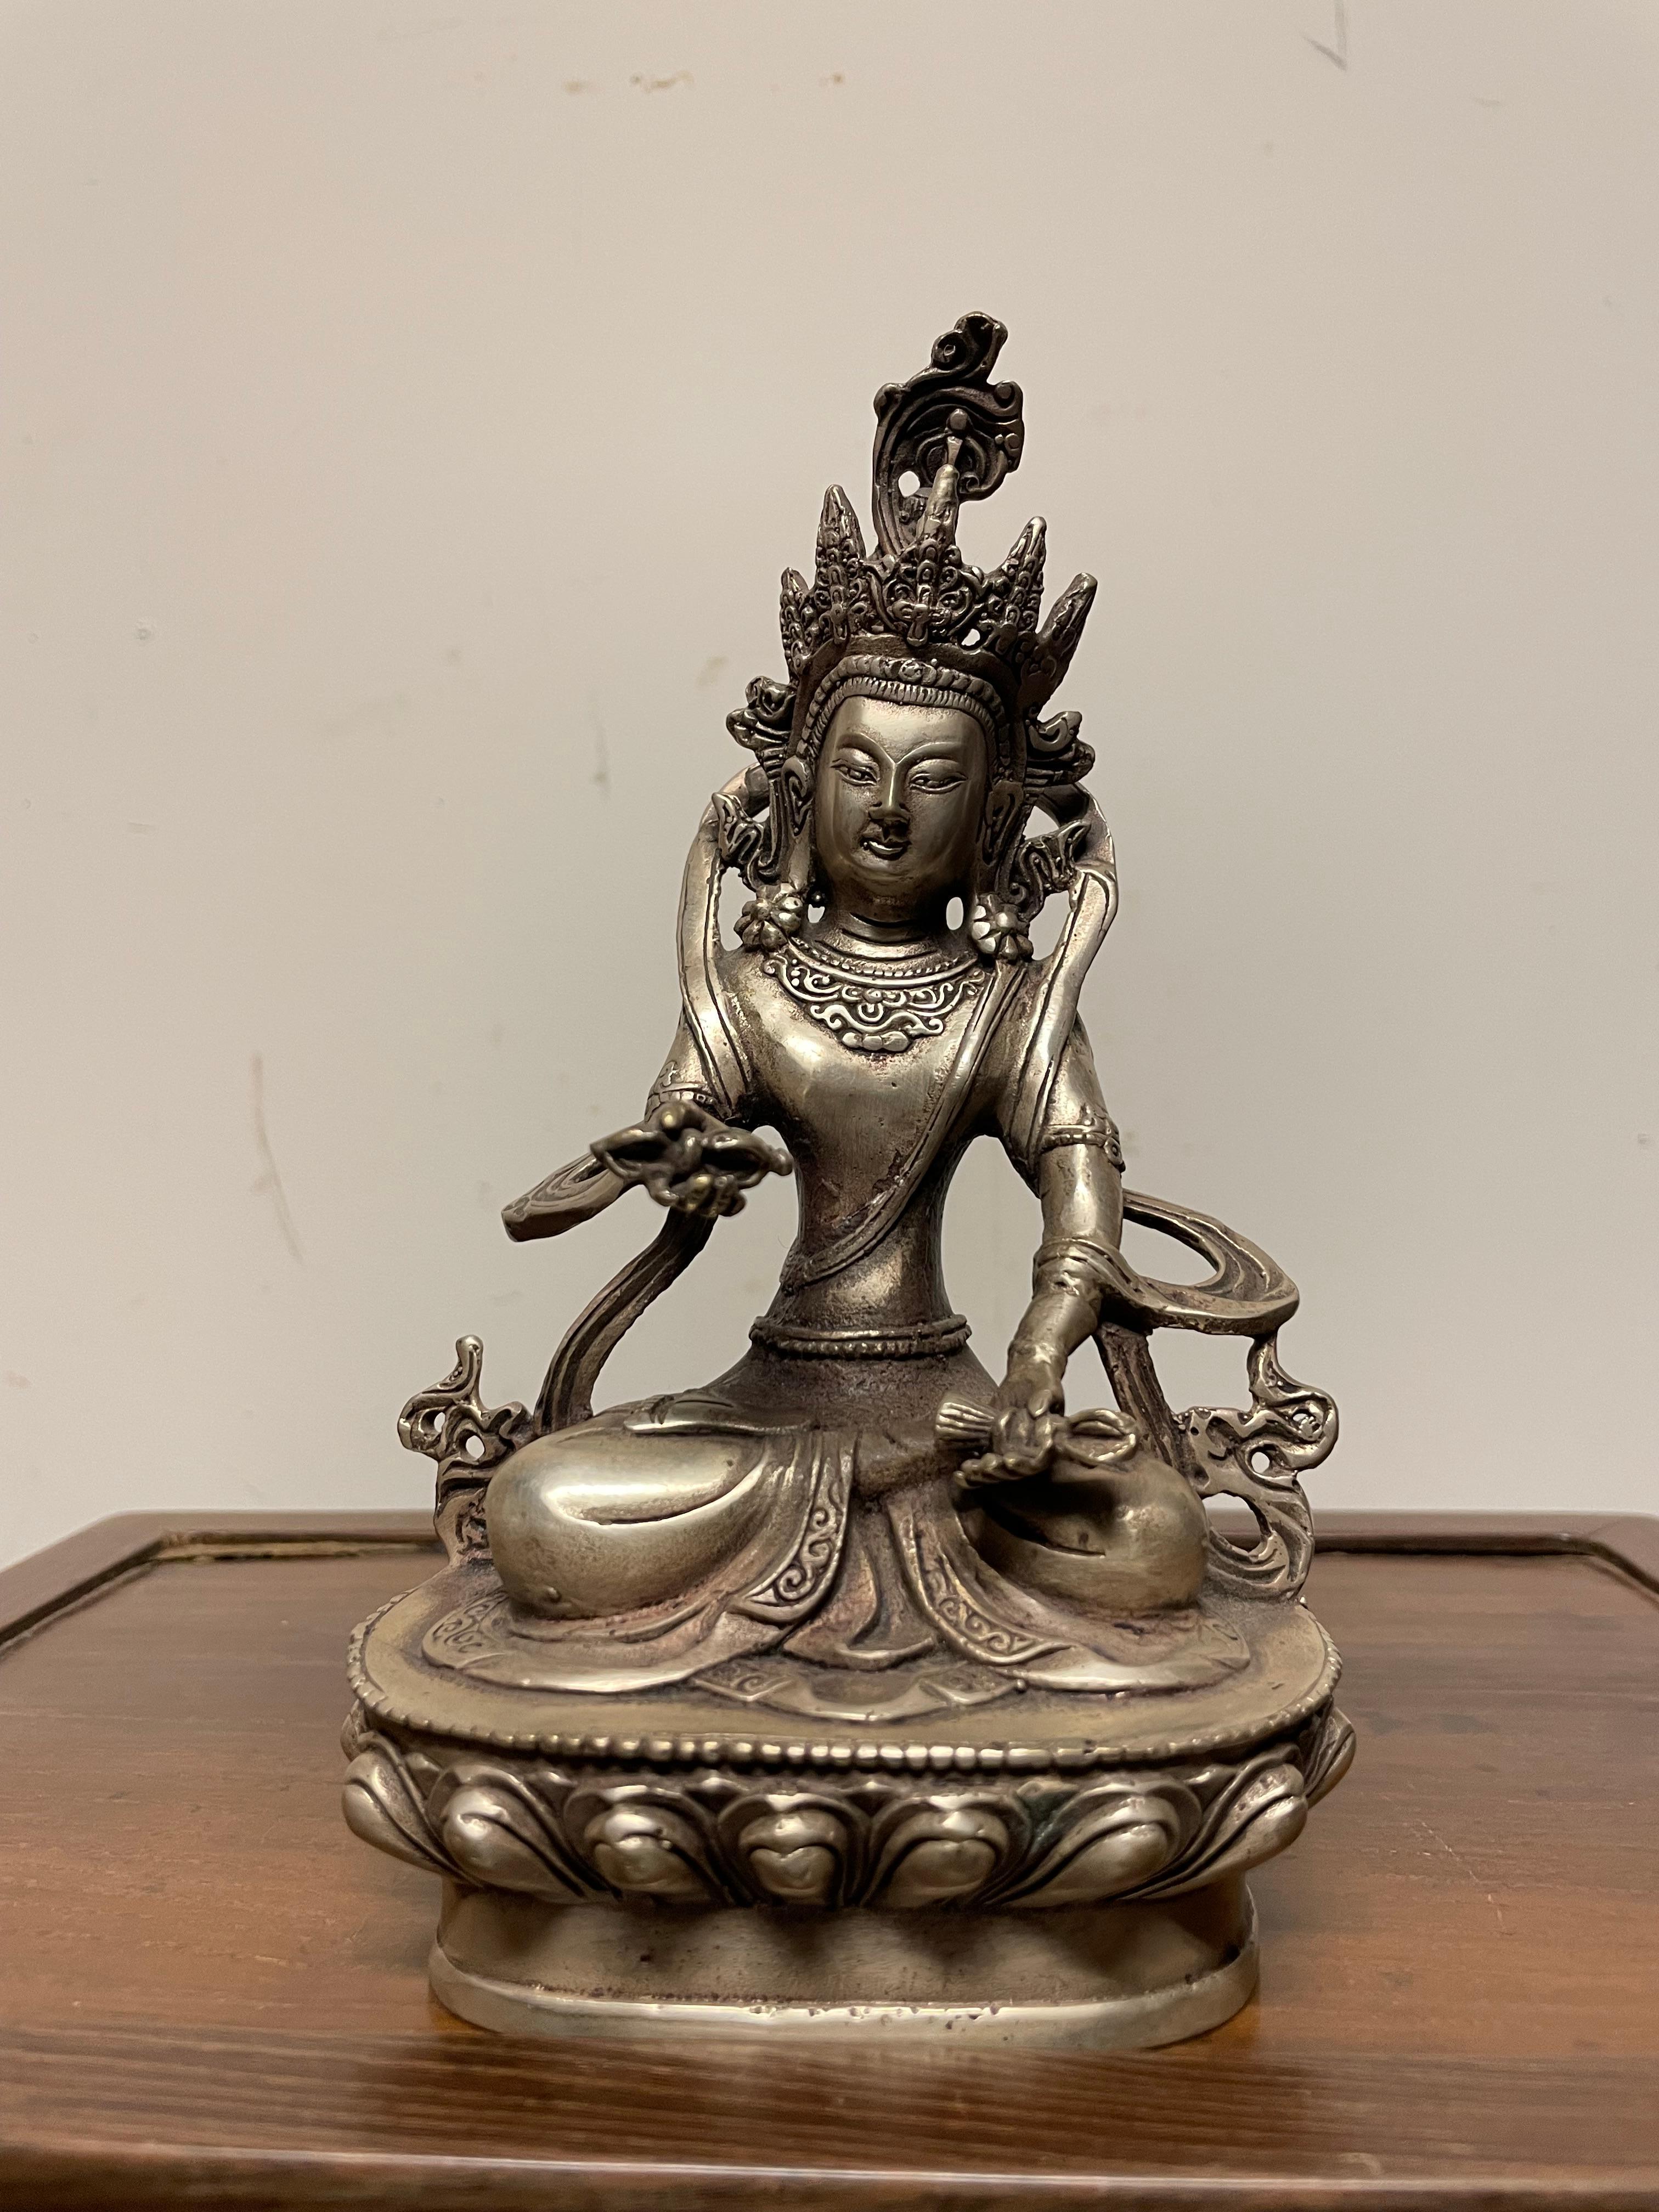 Wonderful small silvered bronze of Vajradhara. Indian, circa 1900. 
7 inches high by 4 wide by 3 deep

The Tibetan Buddhist deity Vajradhara is seated in a yogic meditation on a lotus pedestal. His hands hold identifying attributes, the dorje